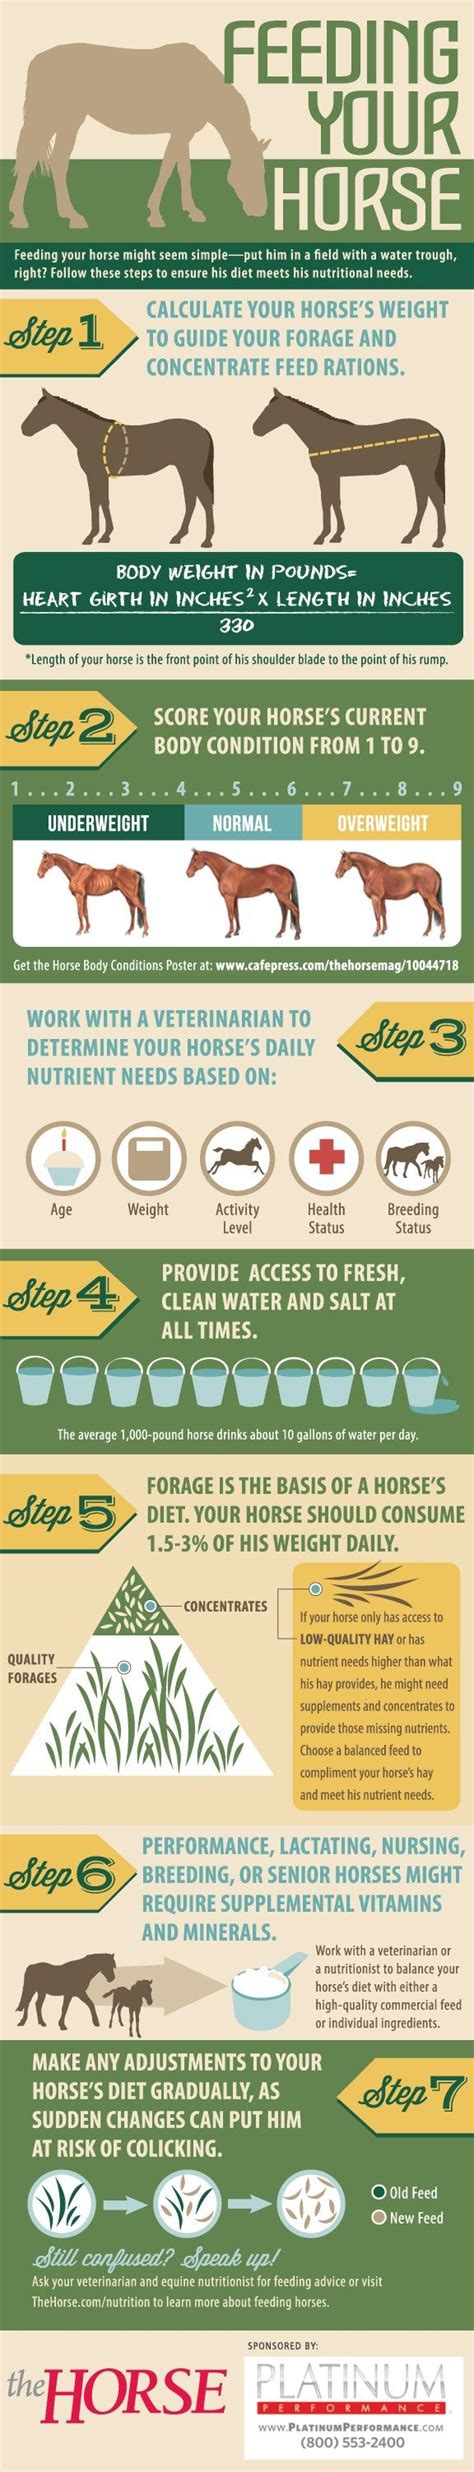 Infographic Feeding Your Horse The Horse Horse Care Healthy